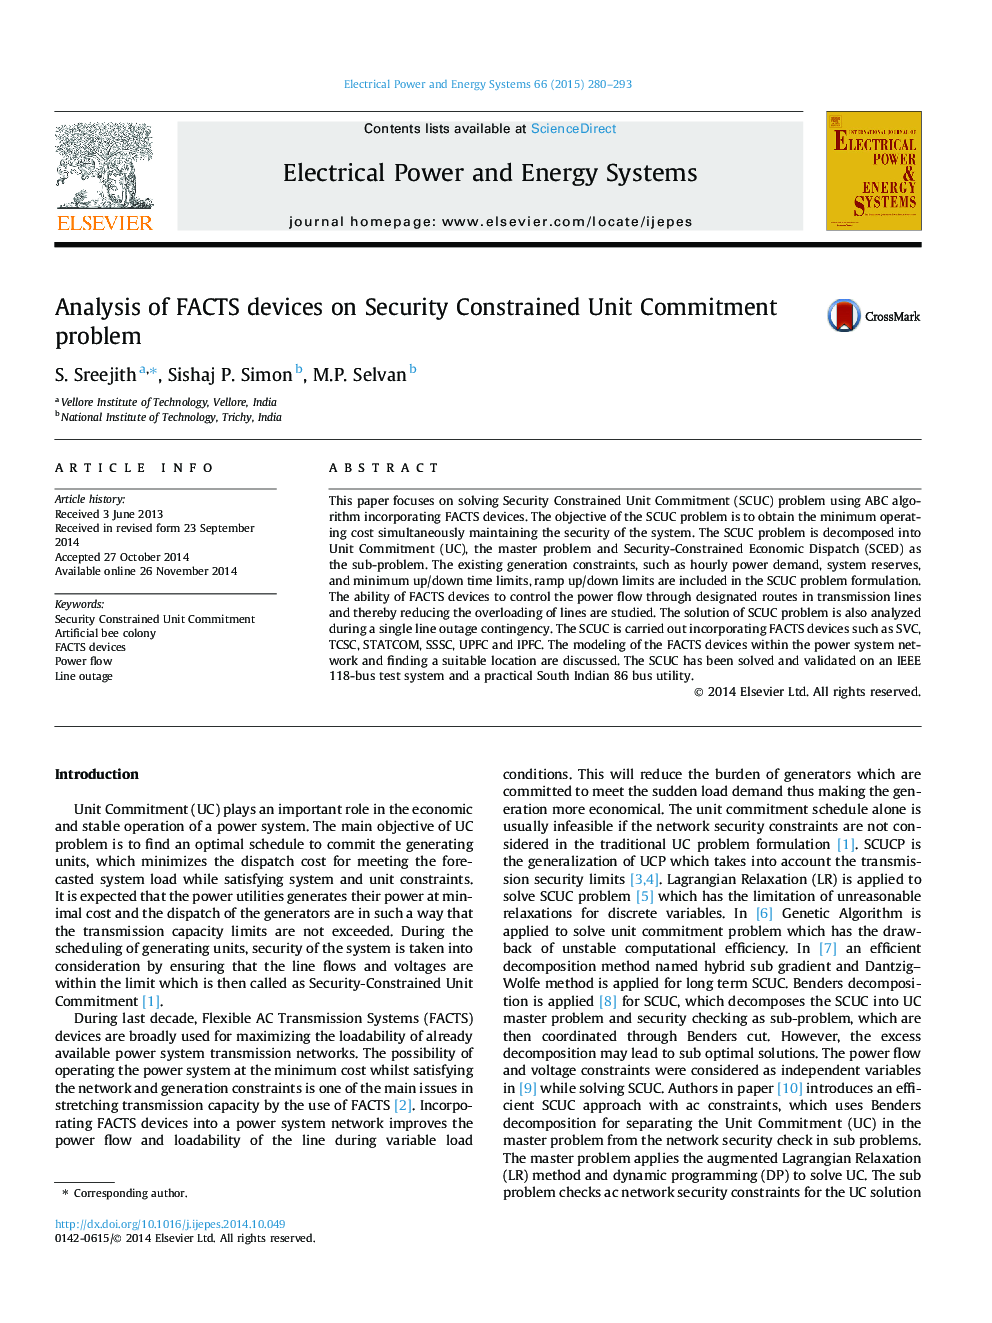 Analysis of FACTS devices on Security Constrained Unit Commitment problem